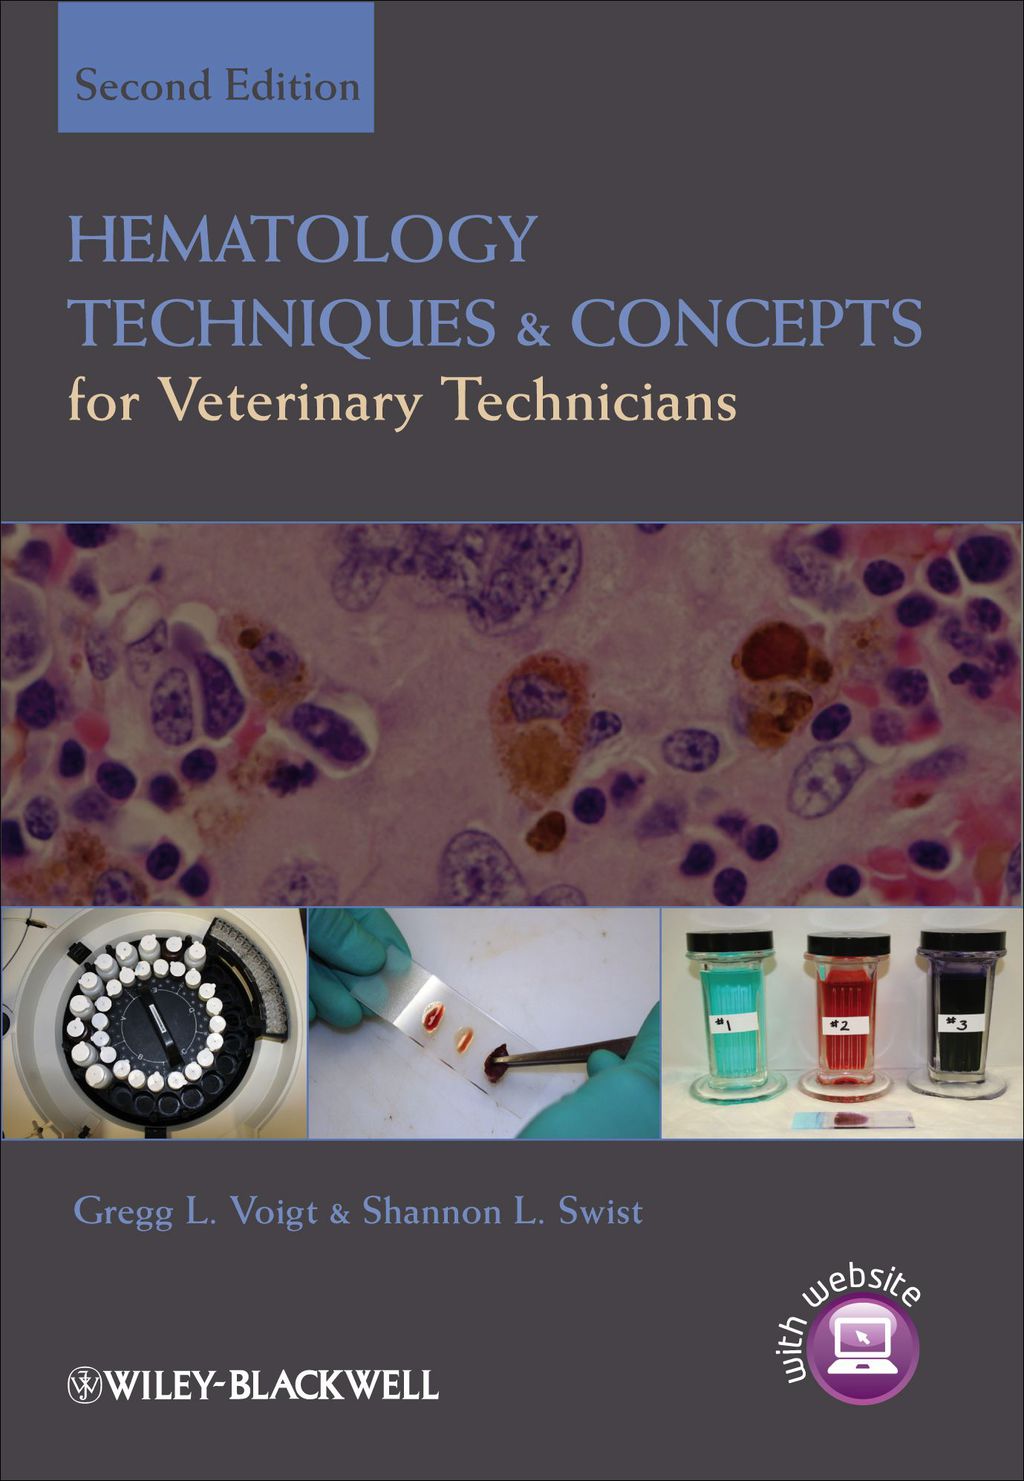 Hematology Techniques and Concepts for Veterinary Technicians (eBook) - Gregg L. Voigt and Shannon L. Swist